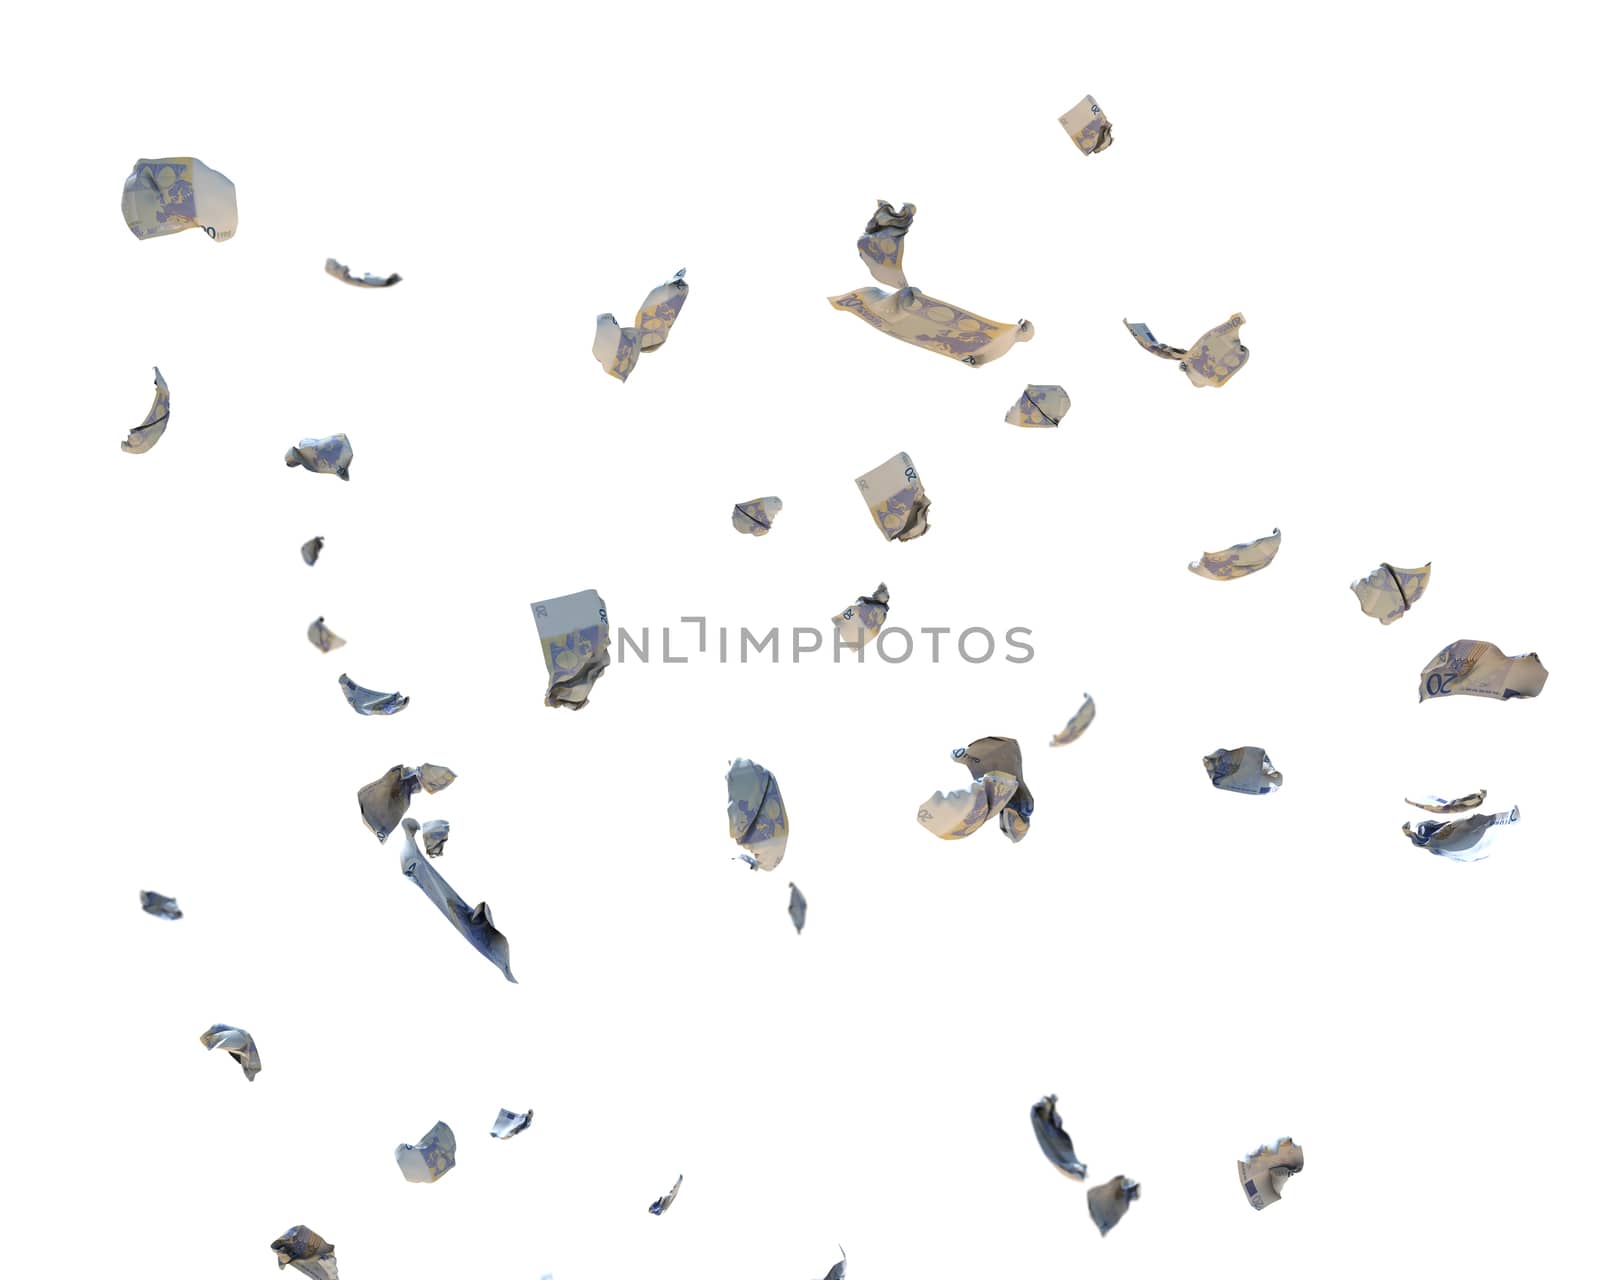 20 Euro Currency Crumpled Banknotes flying, against white, clipping path included